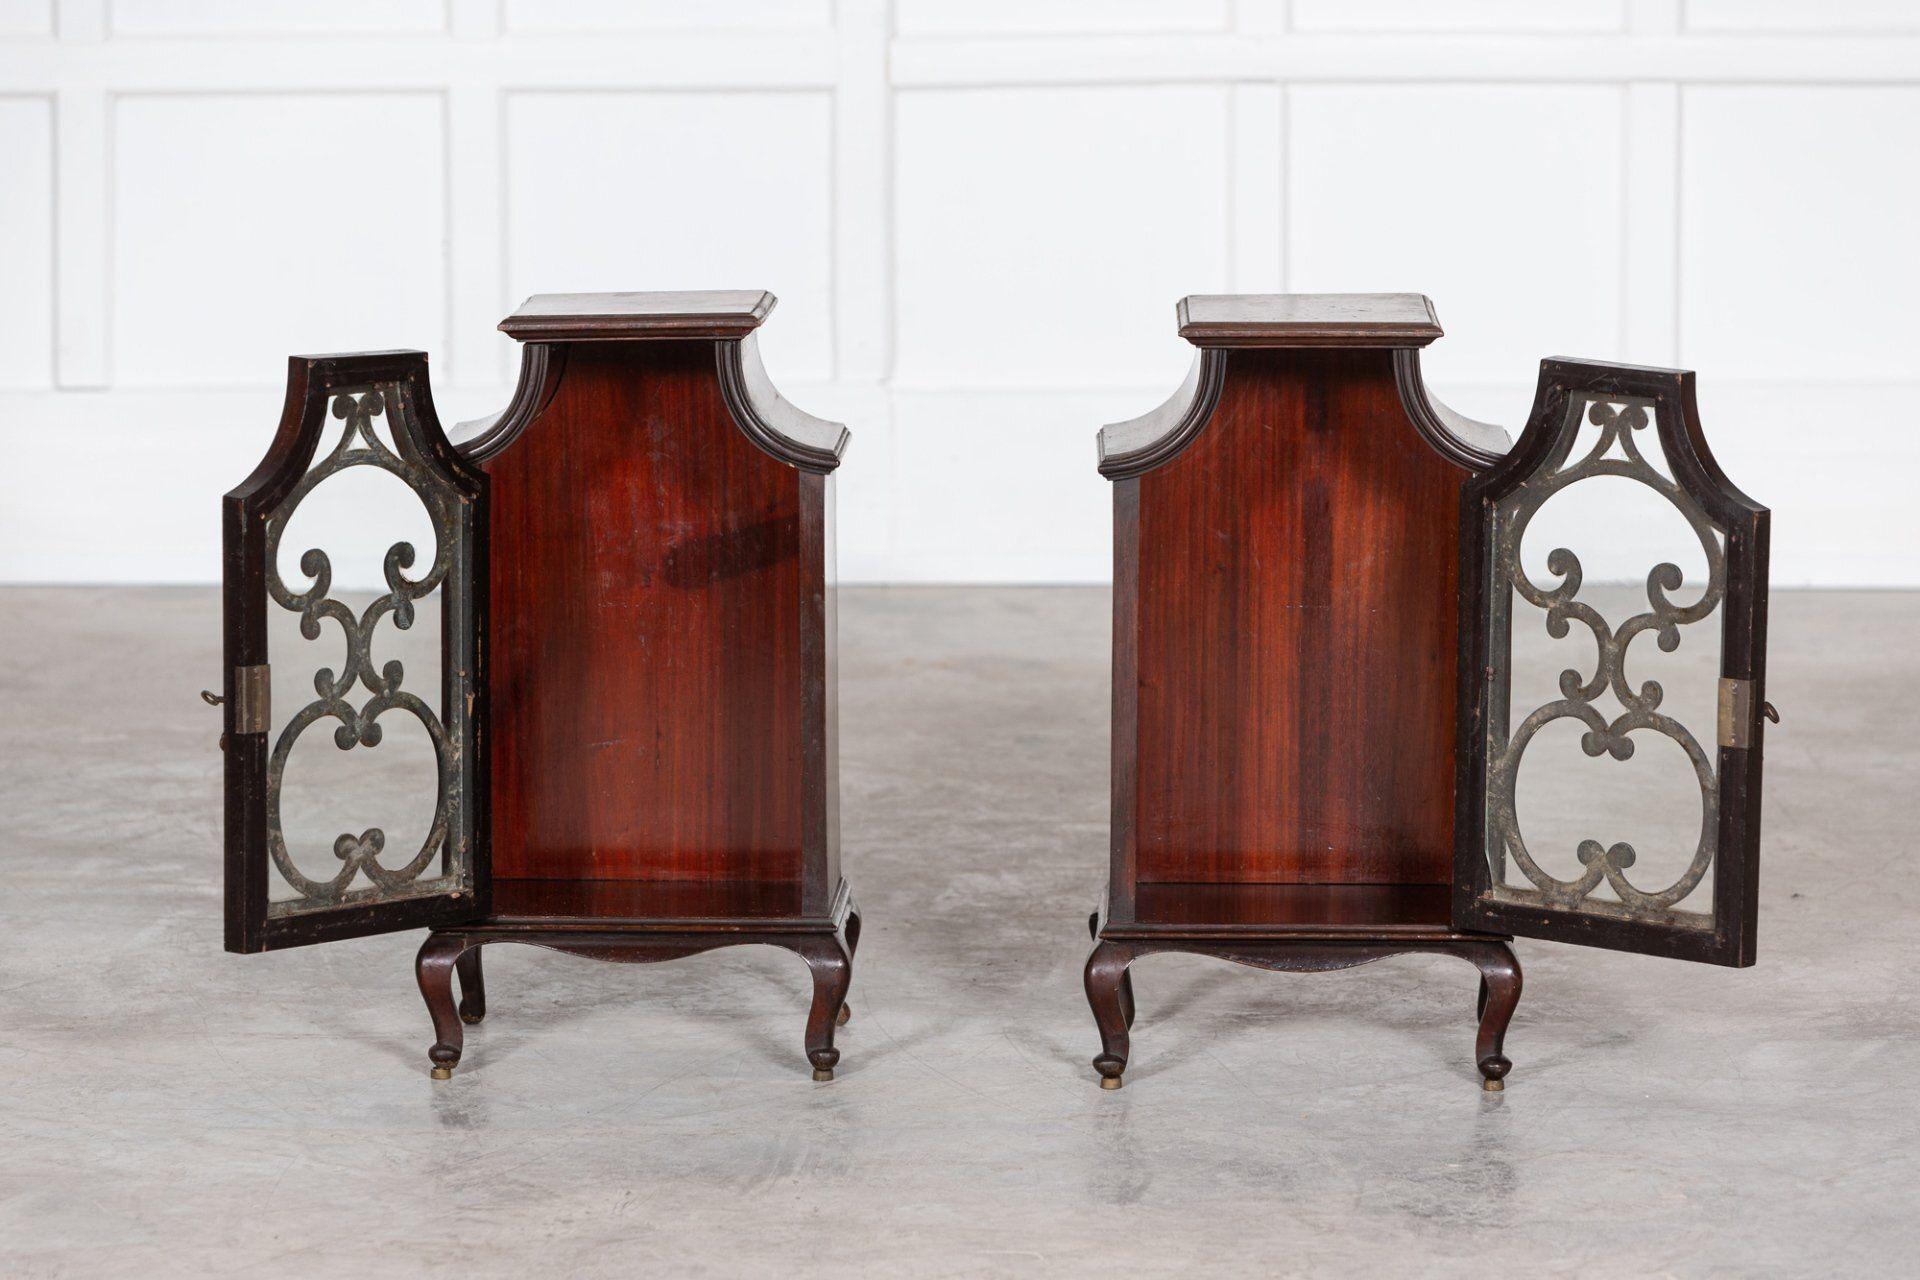 circa 1890.
Pair 19th C English mahogany glazed cabinets with original keys.
Sold as a pair.
Excellent Form.
sku 1227.
Measures: W30 x D24 x H74 cm.